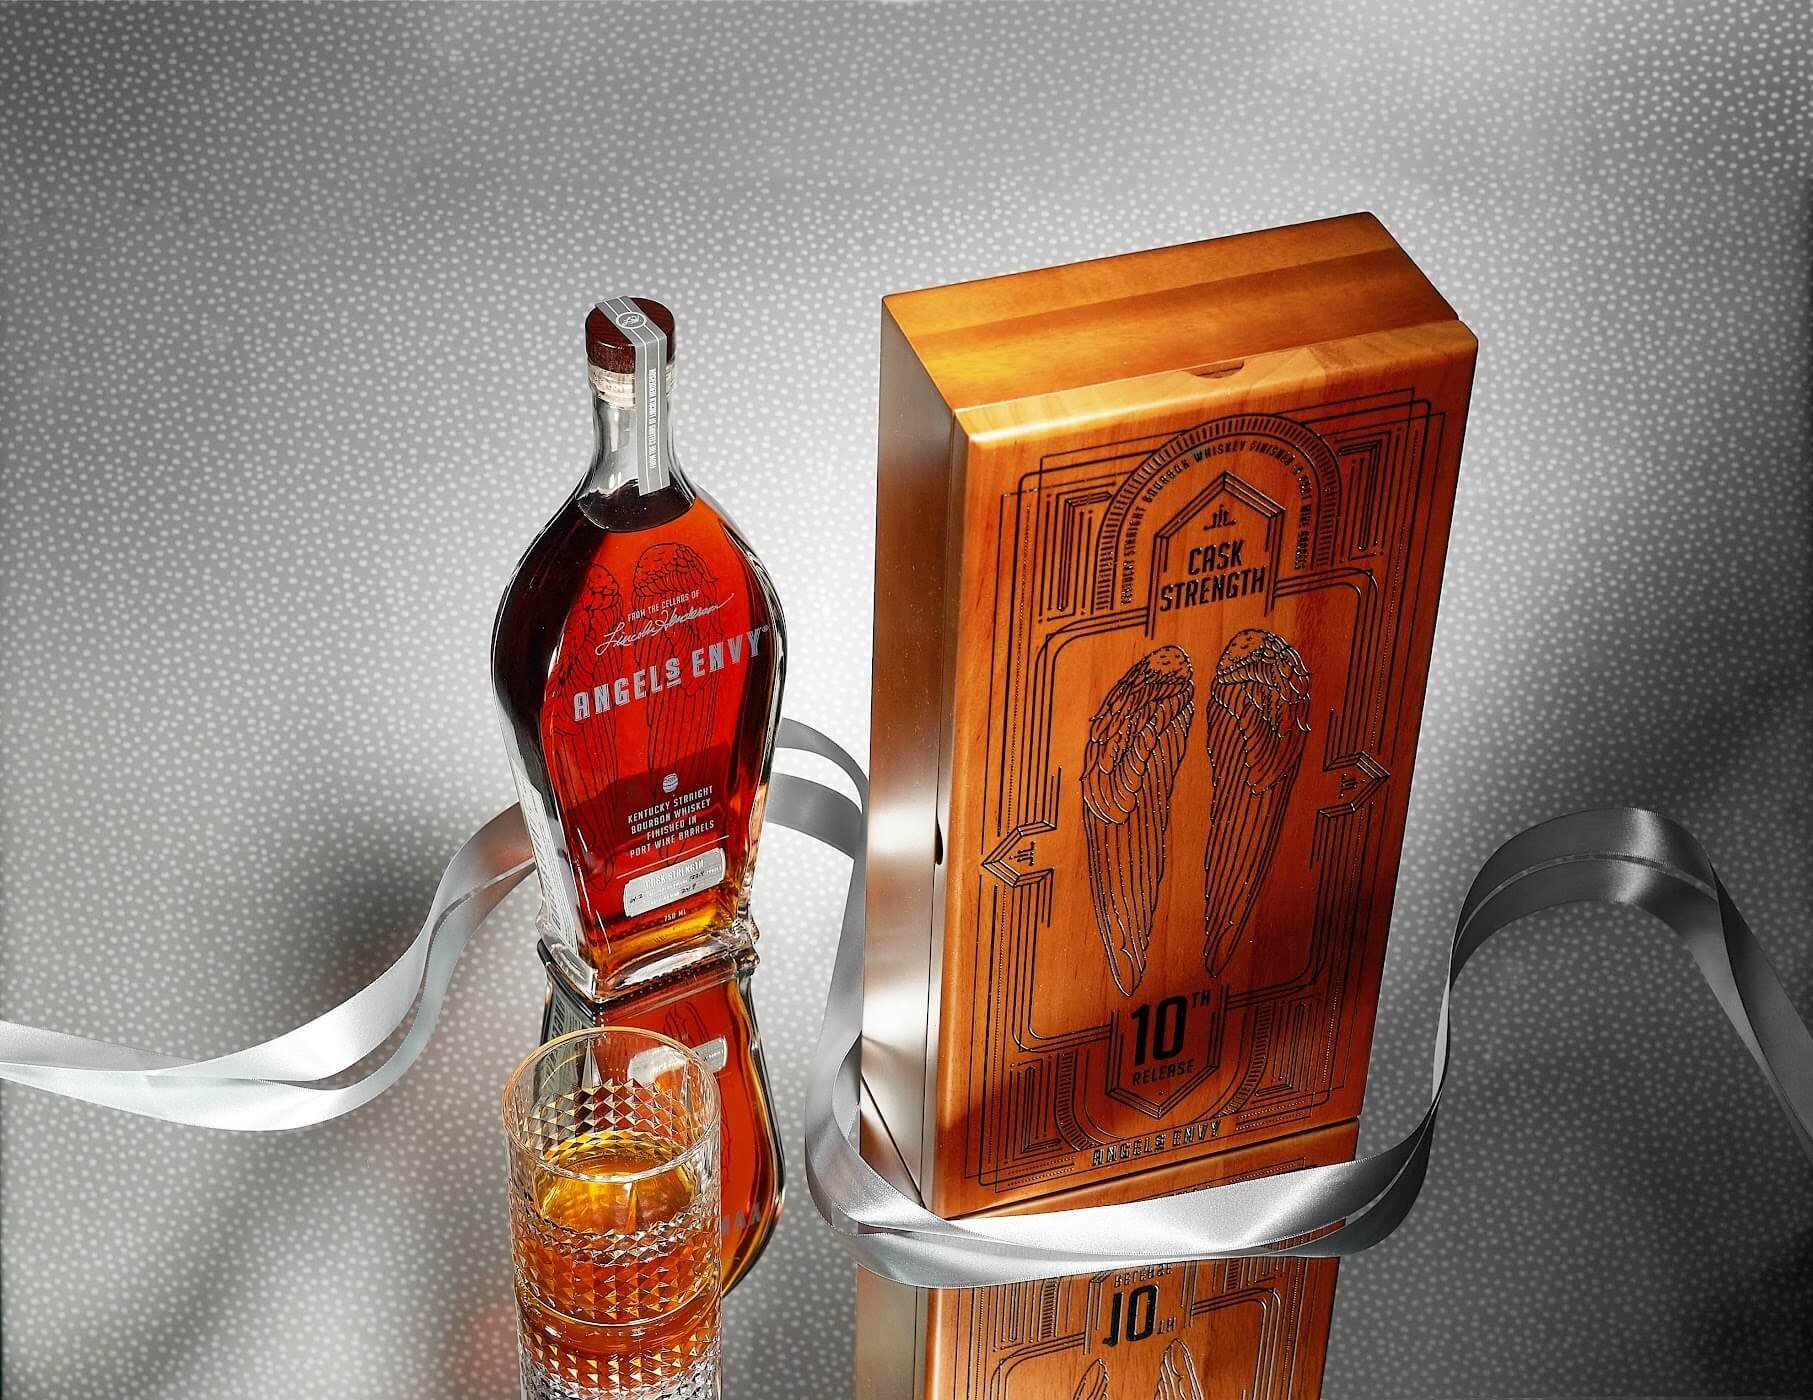 3 High End Ice Molds an Avid Whiskey Drinker Needs to Own